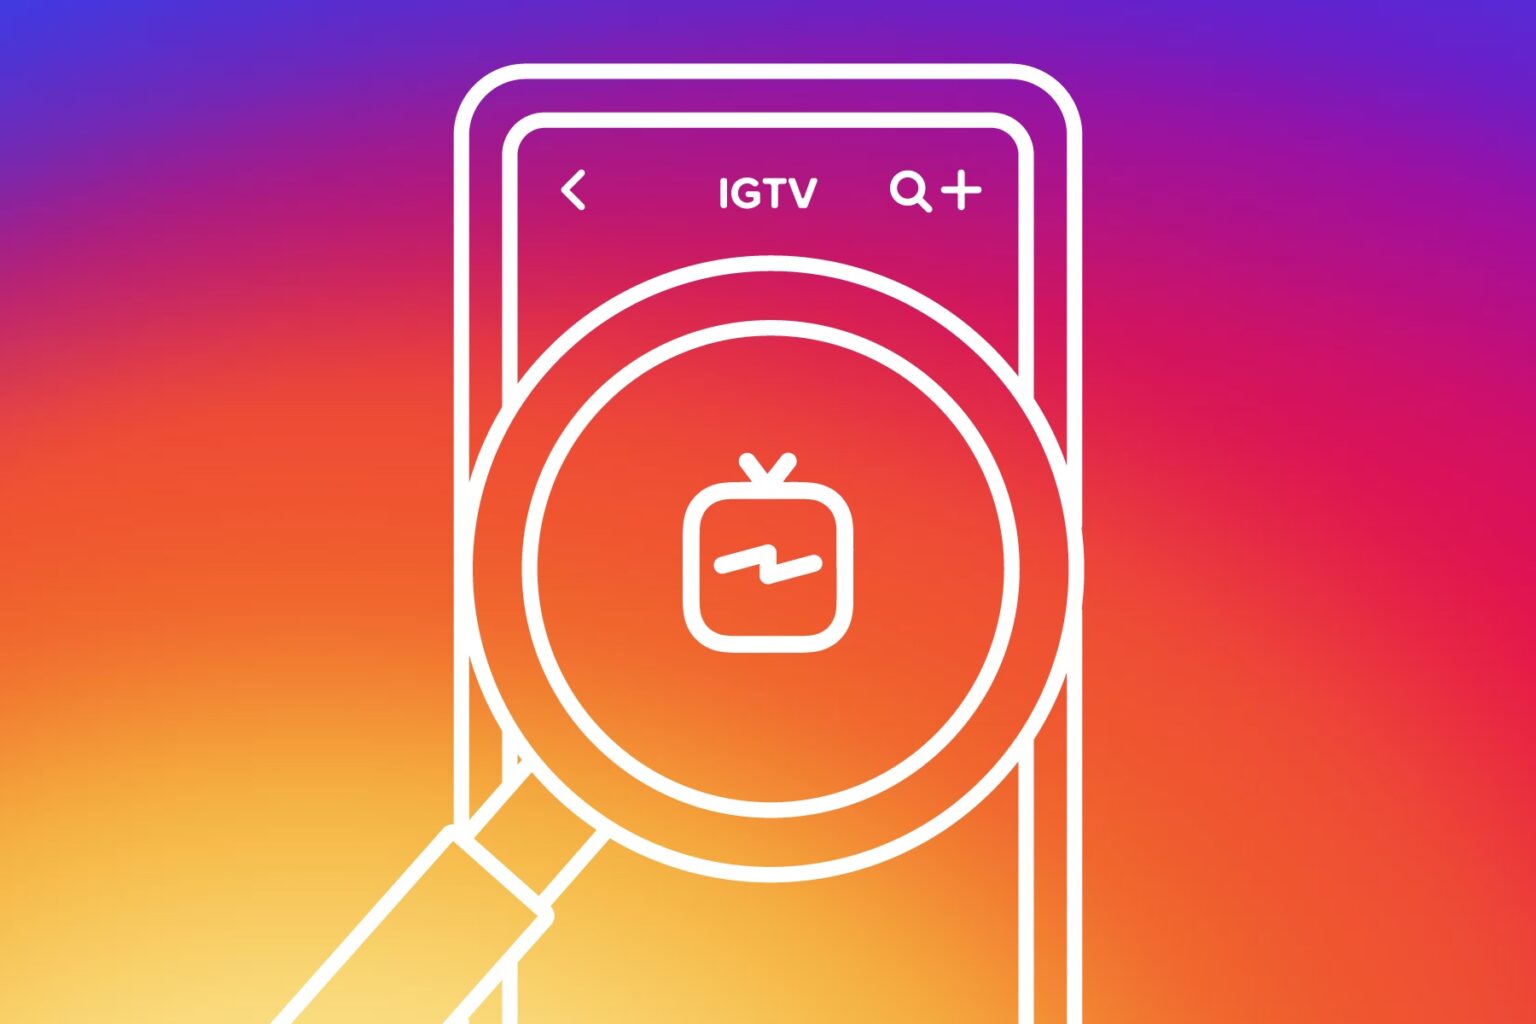 Instagram's IGTV service can be an important tool when it comes to growing your business. Learn how to use the latest marketing techniques today.